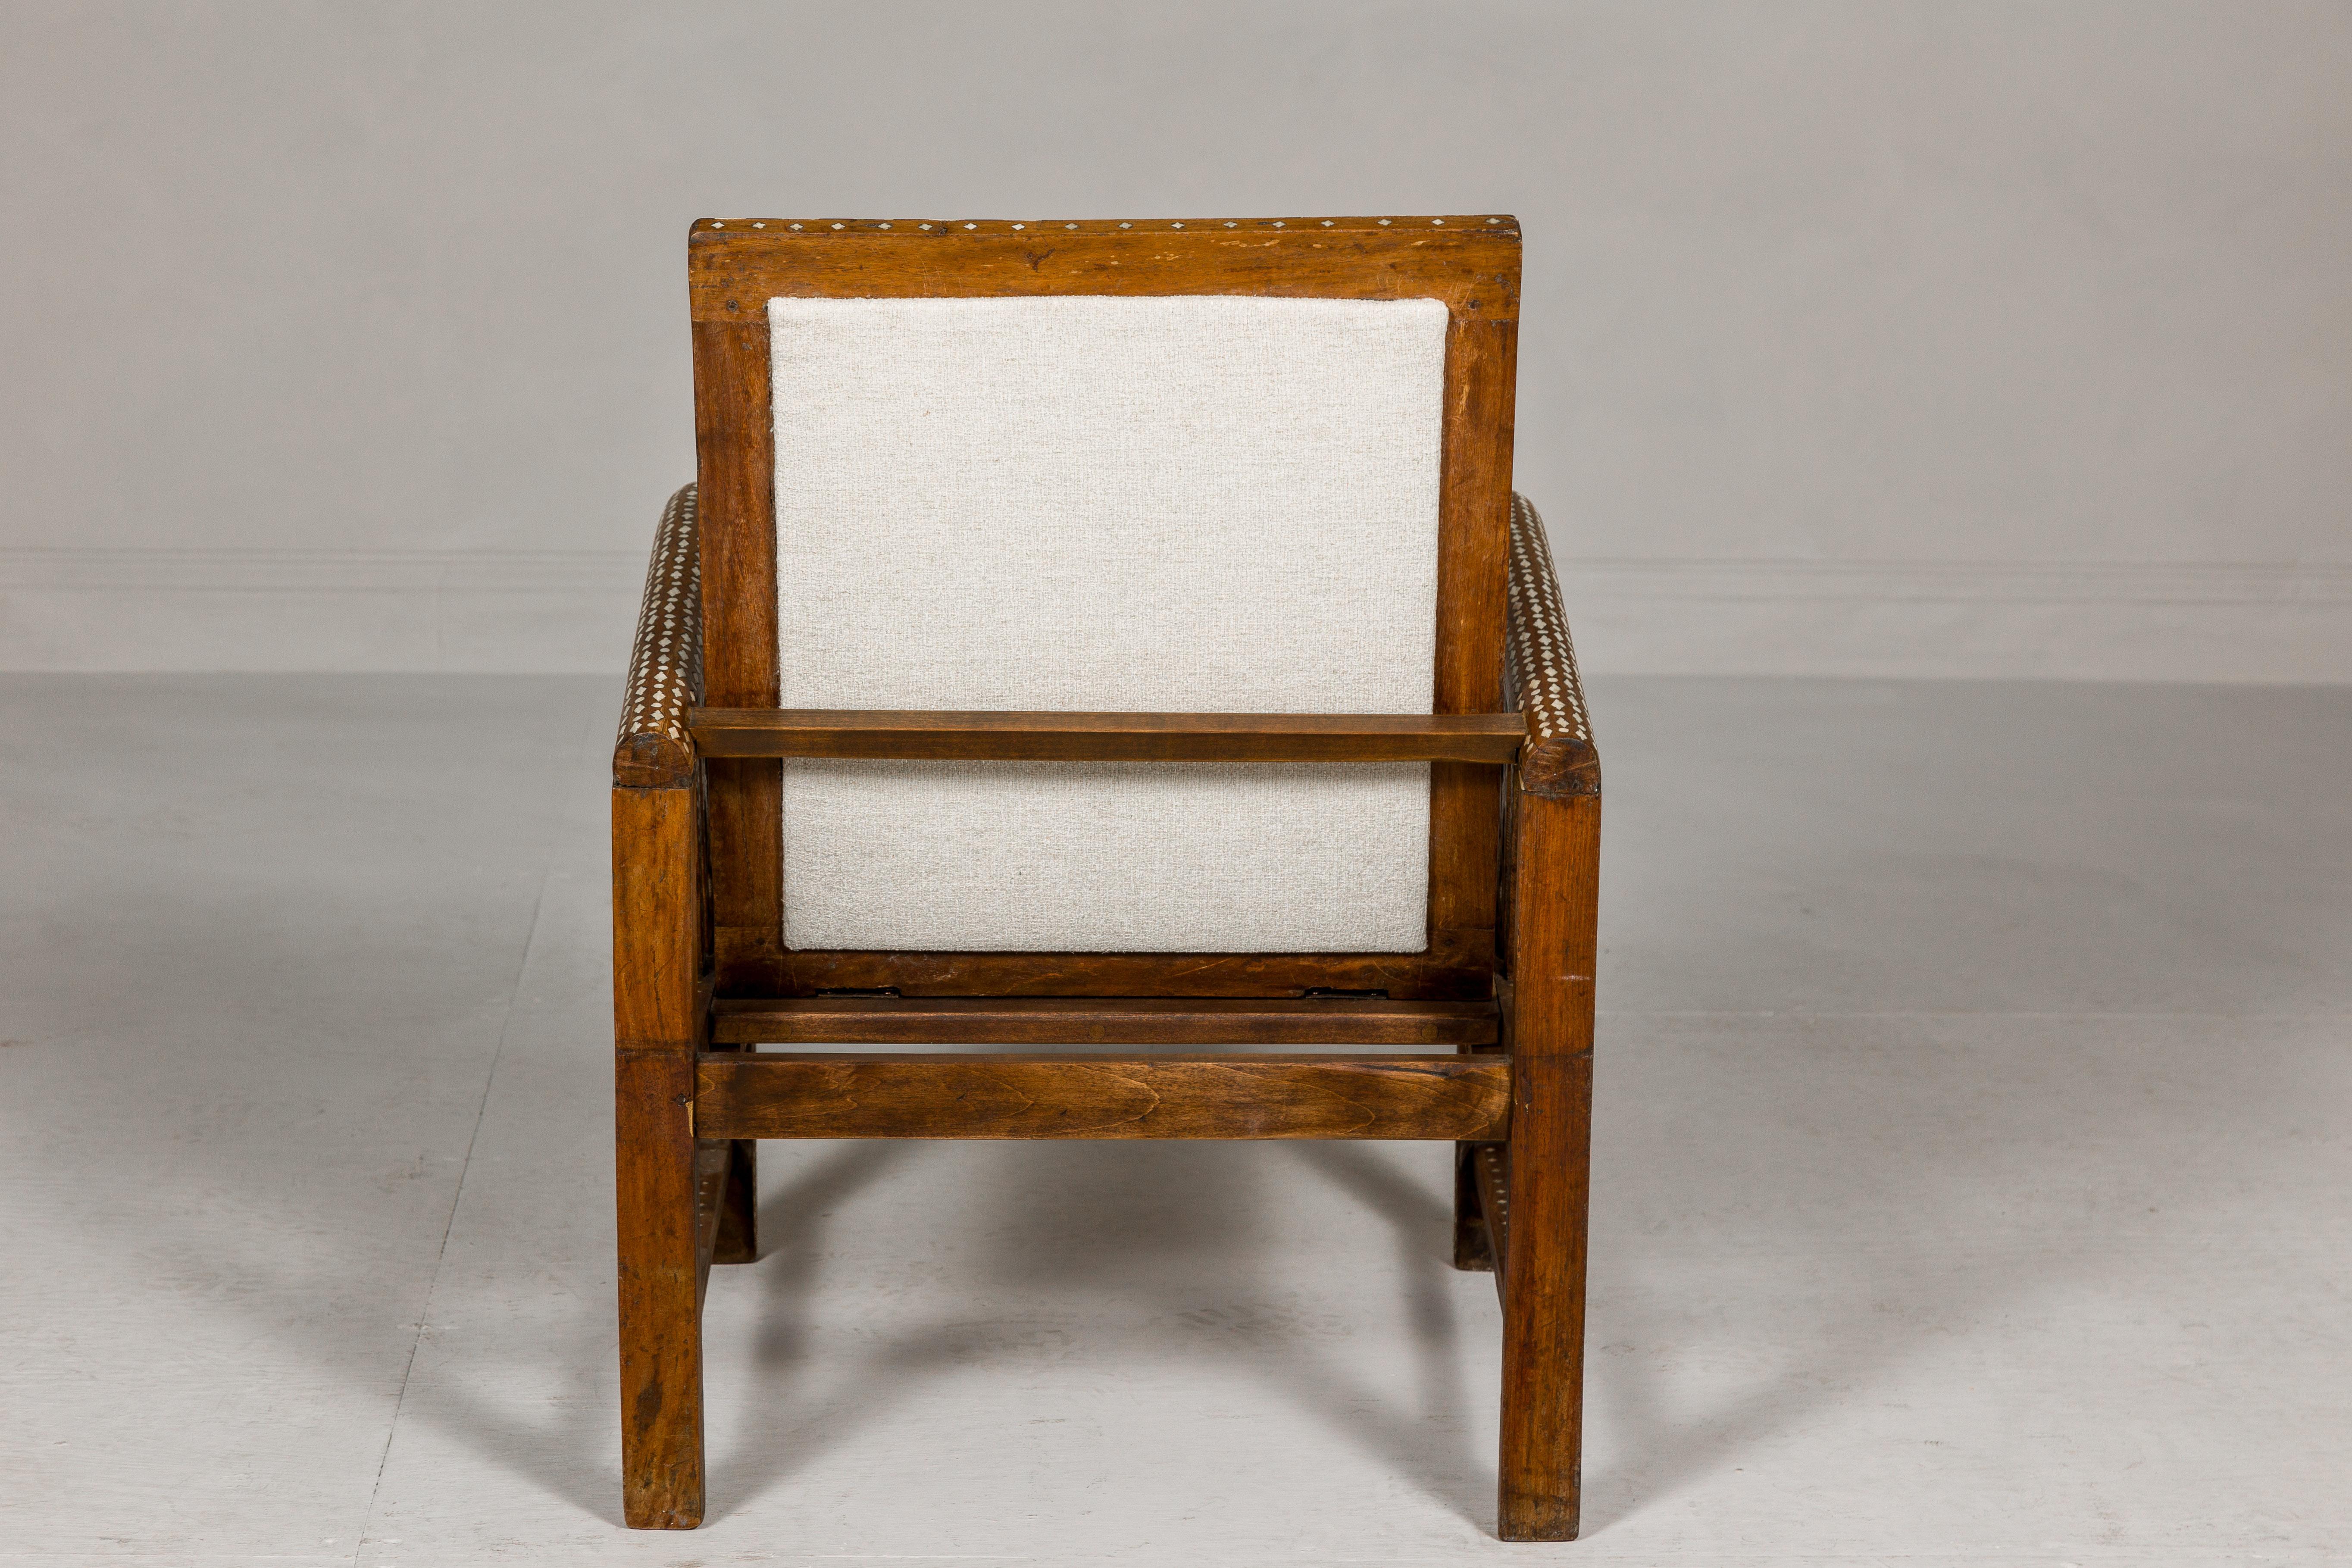 Anglo-Indian Style Bone Inlaid Armchair with Folding Back and Loop Arms For Sale 3